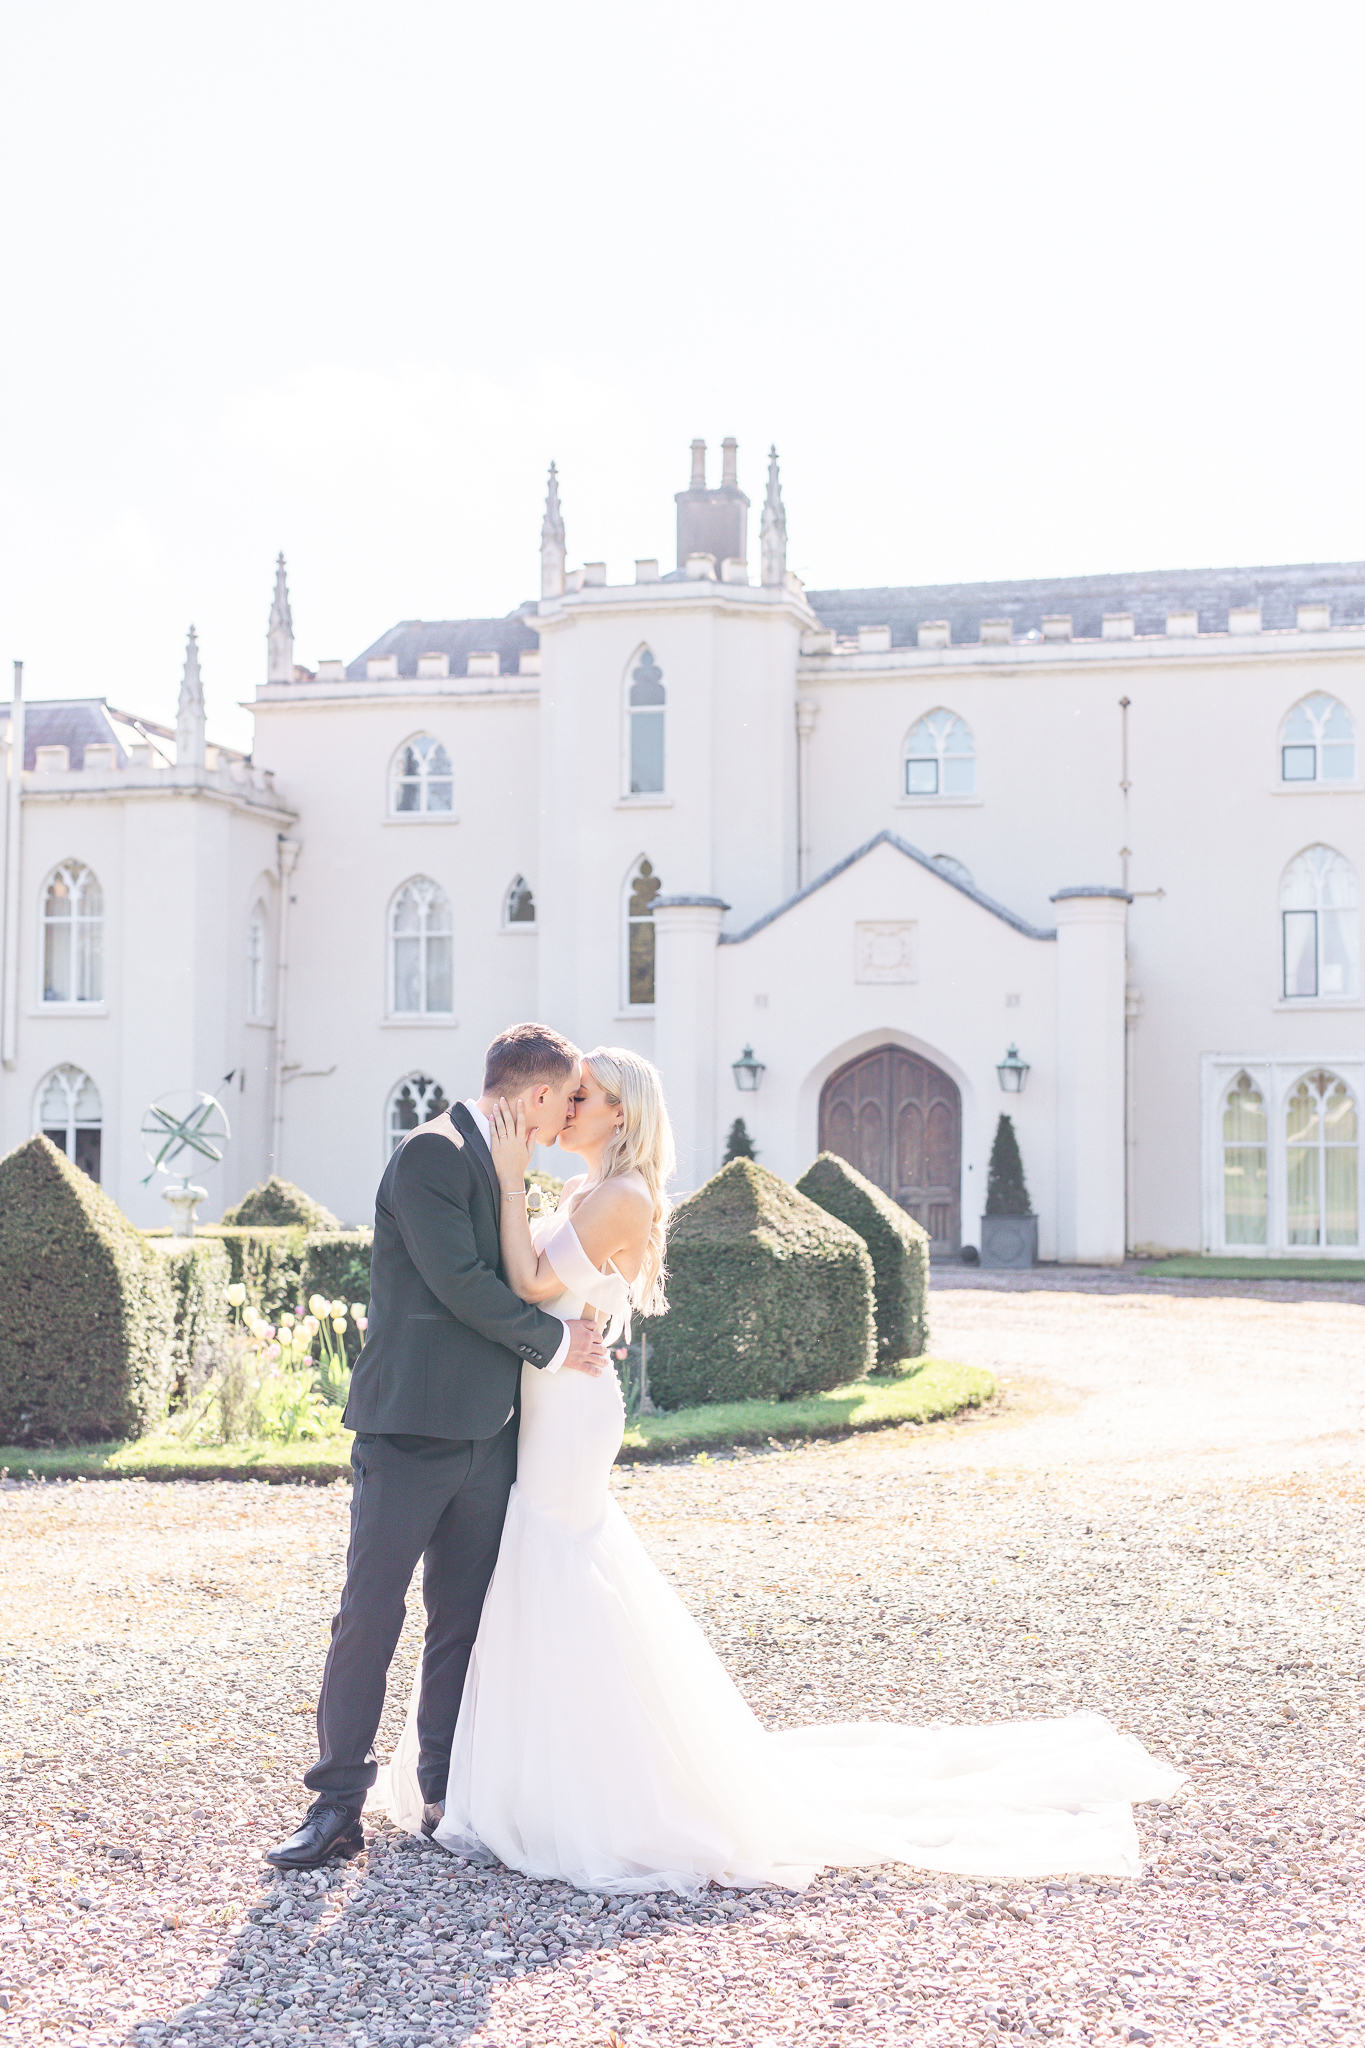 Tender moment between Kelsey and Spencer at North West Wedding venue Combermere Abbey 